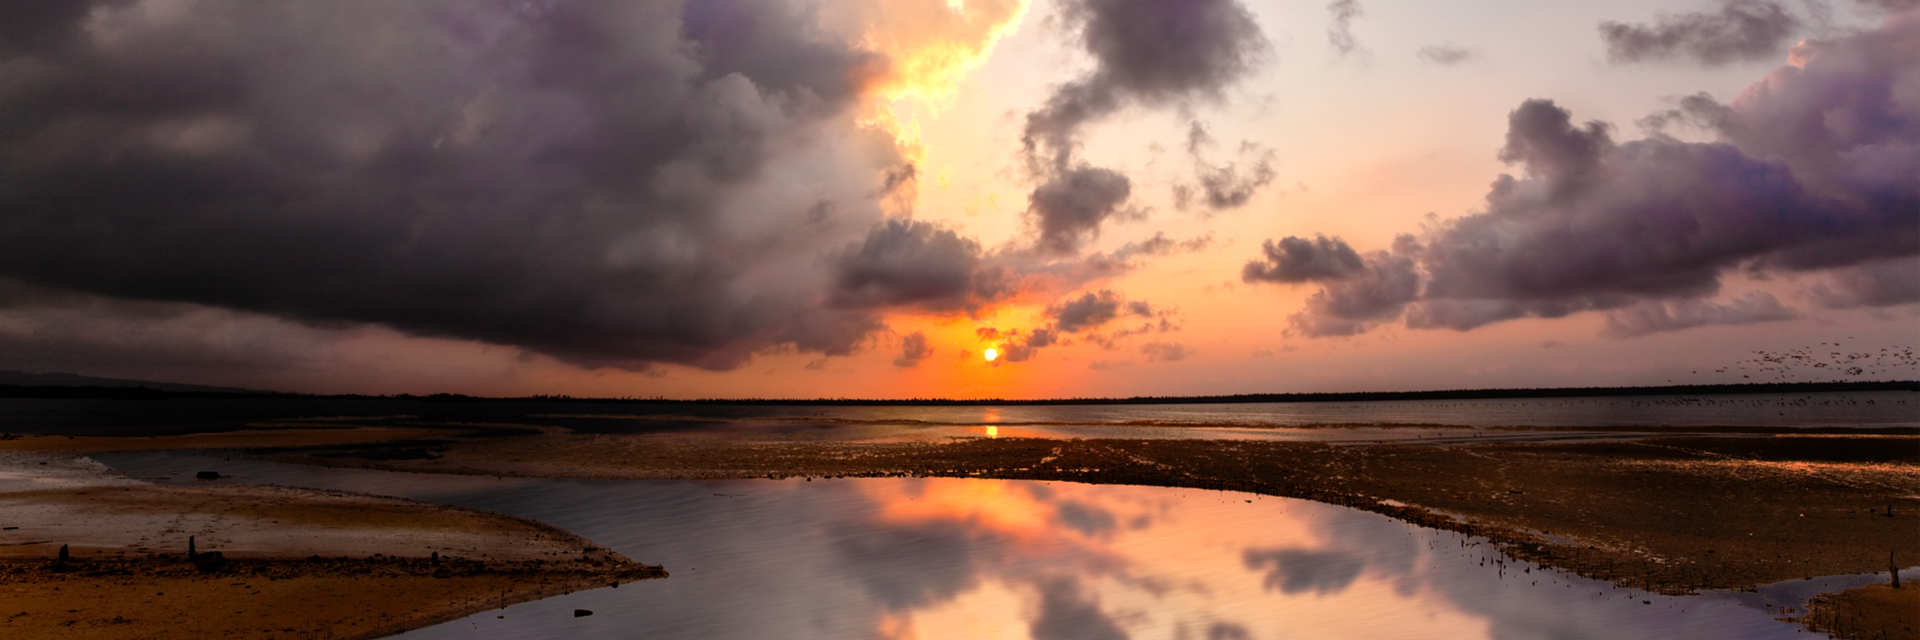 panoramic view of a orange and peach-colored sunset reflected in calm water